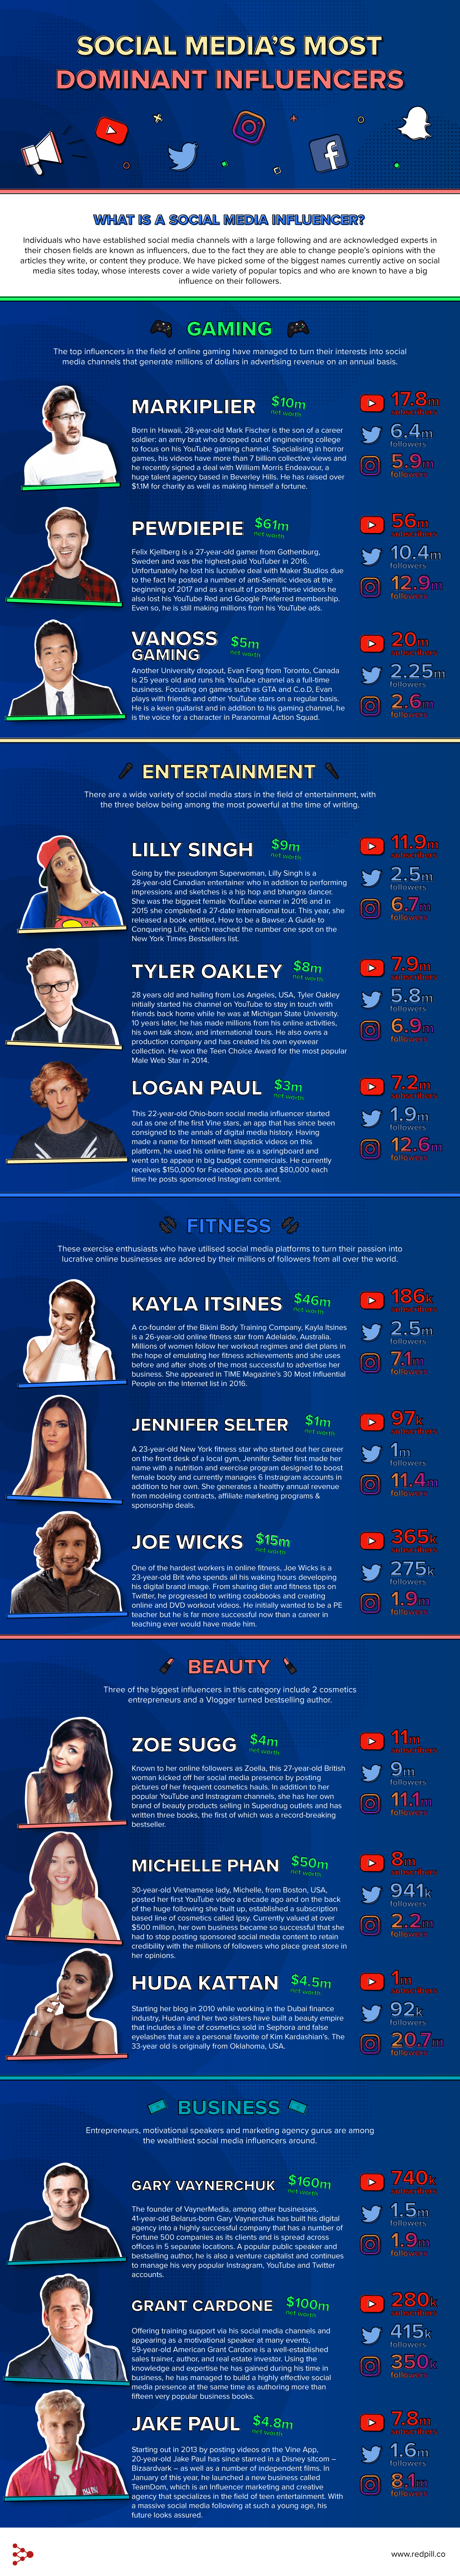 #Infographic Social Media’s Most Dominant Influencers